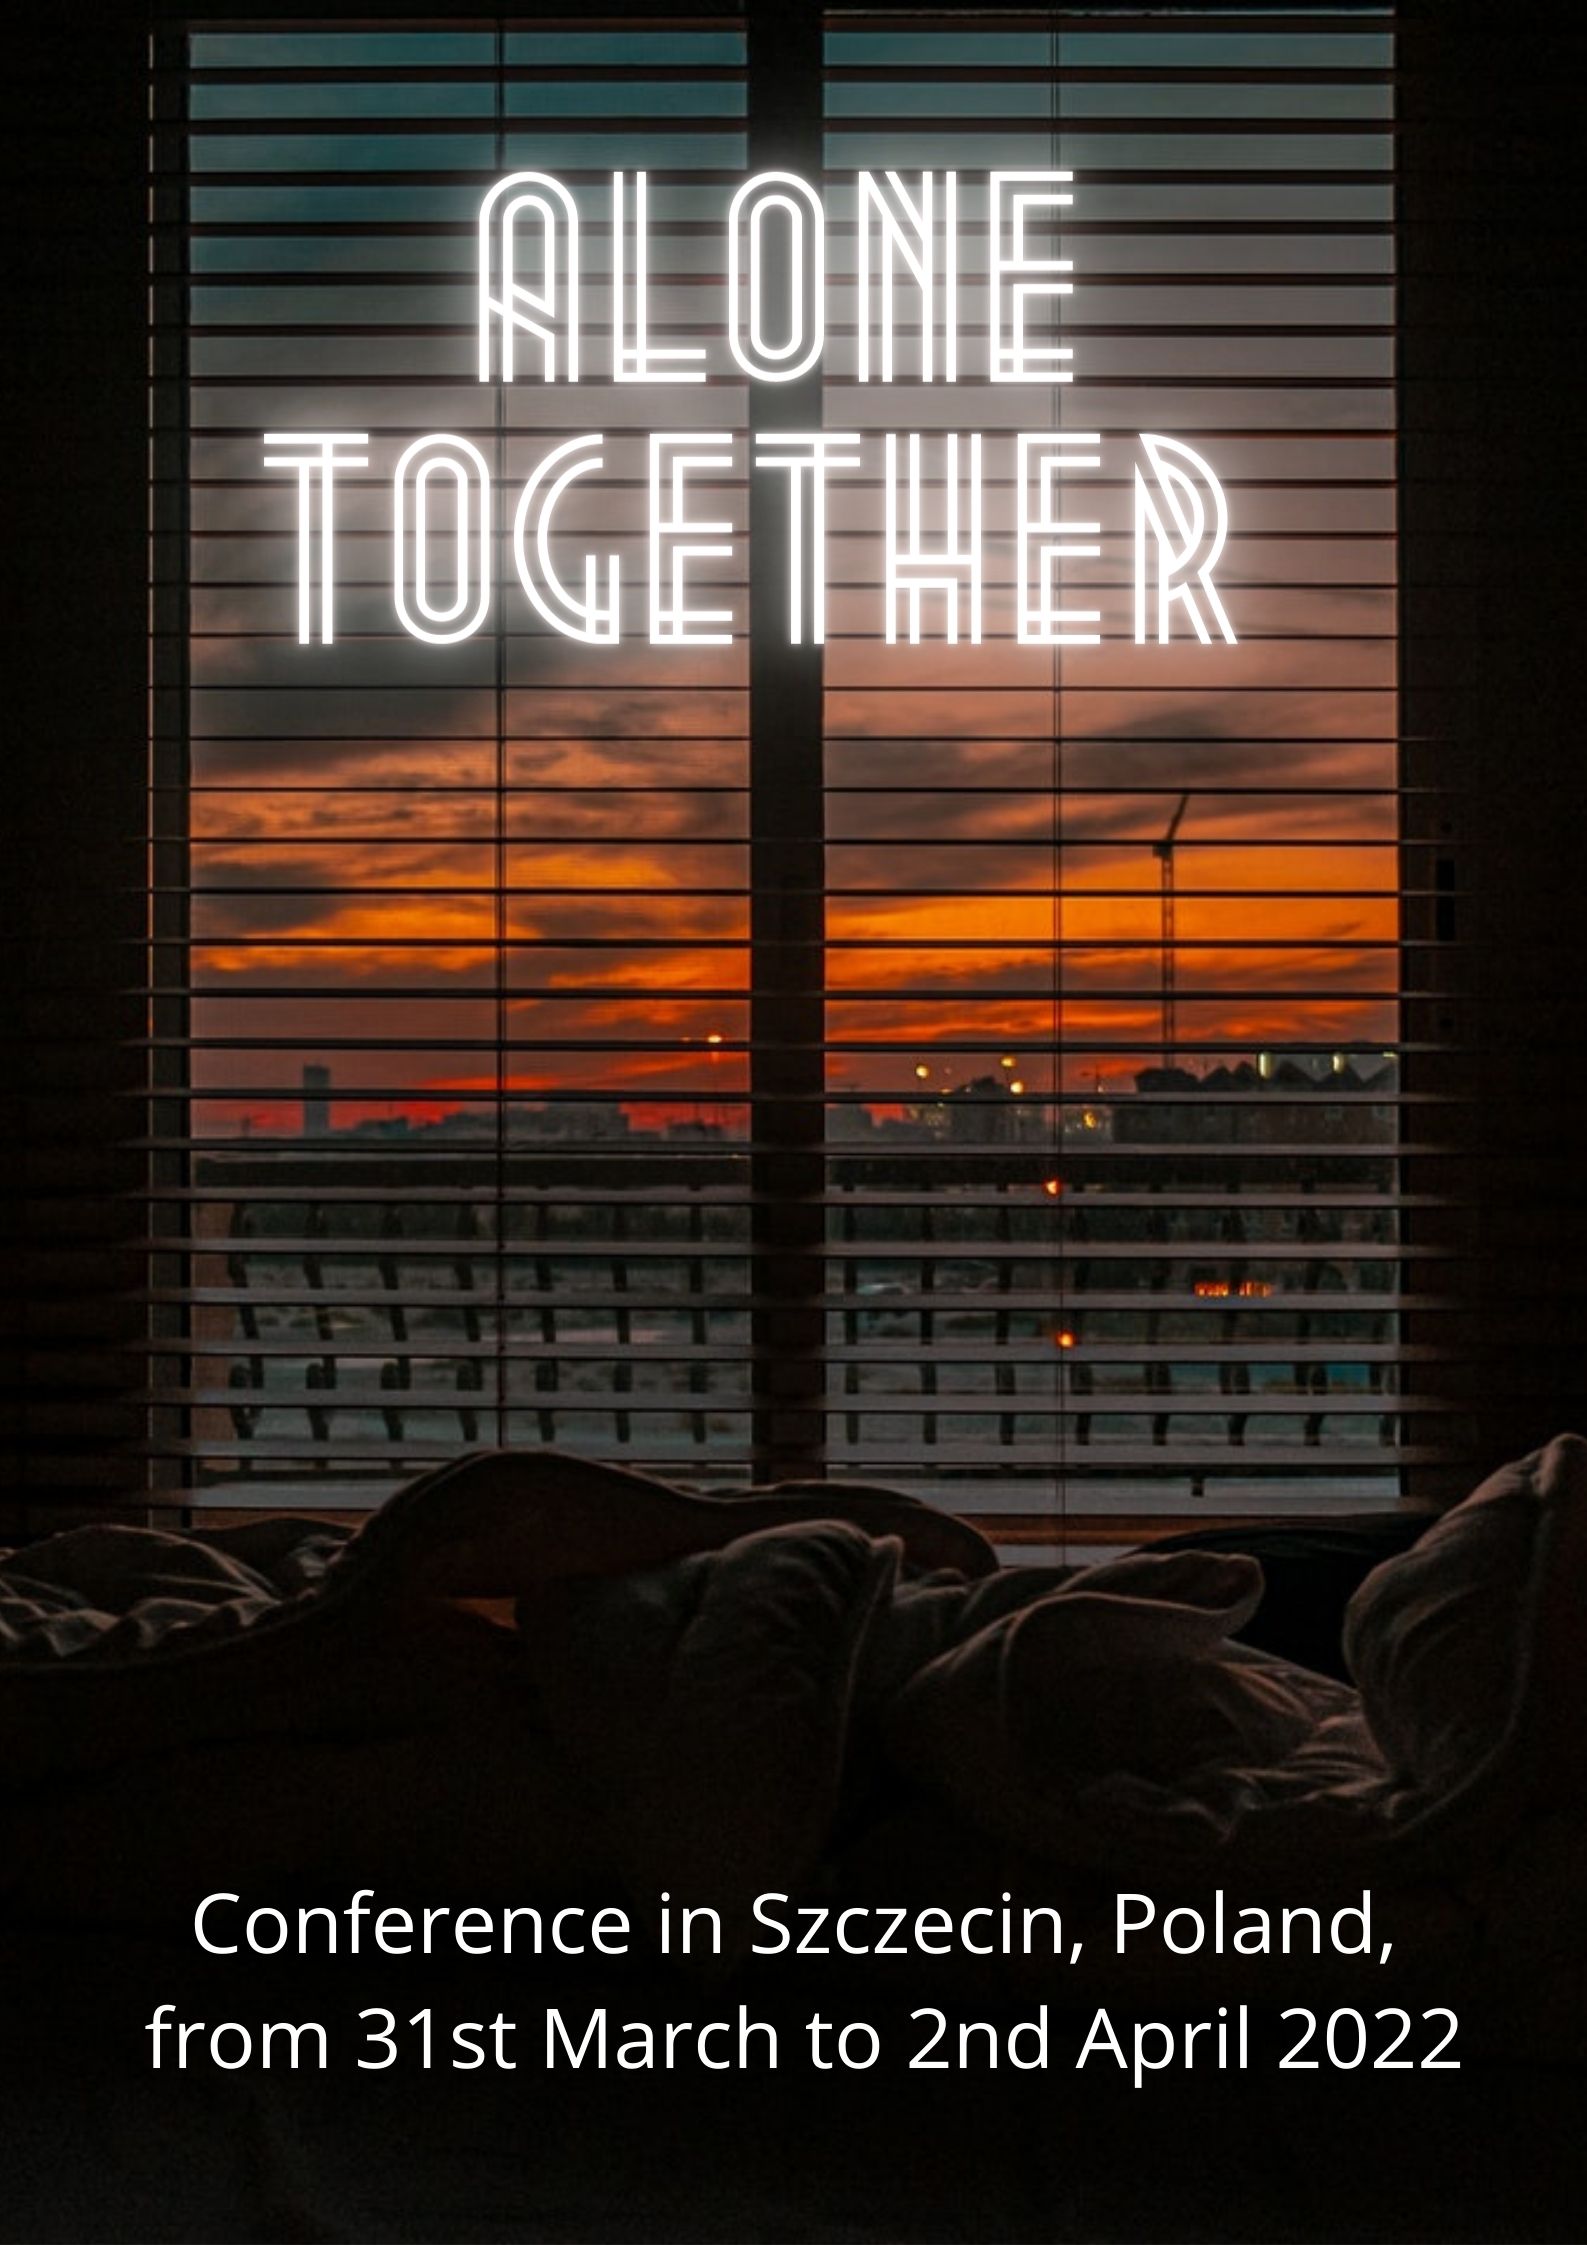 Alone Together – conference from 31st March to 2nd April 2022